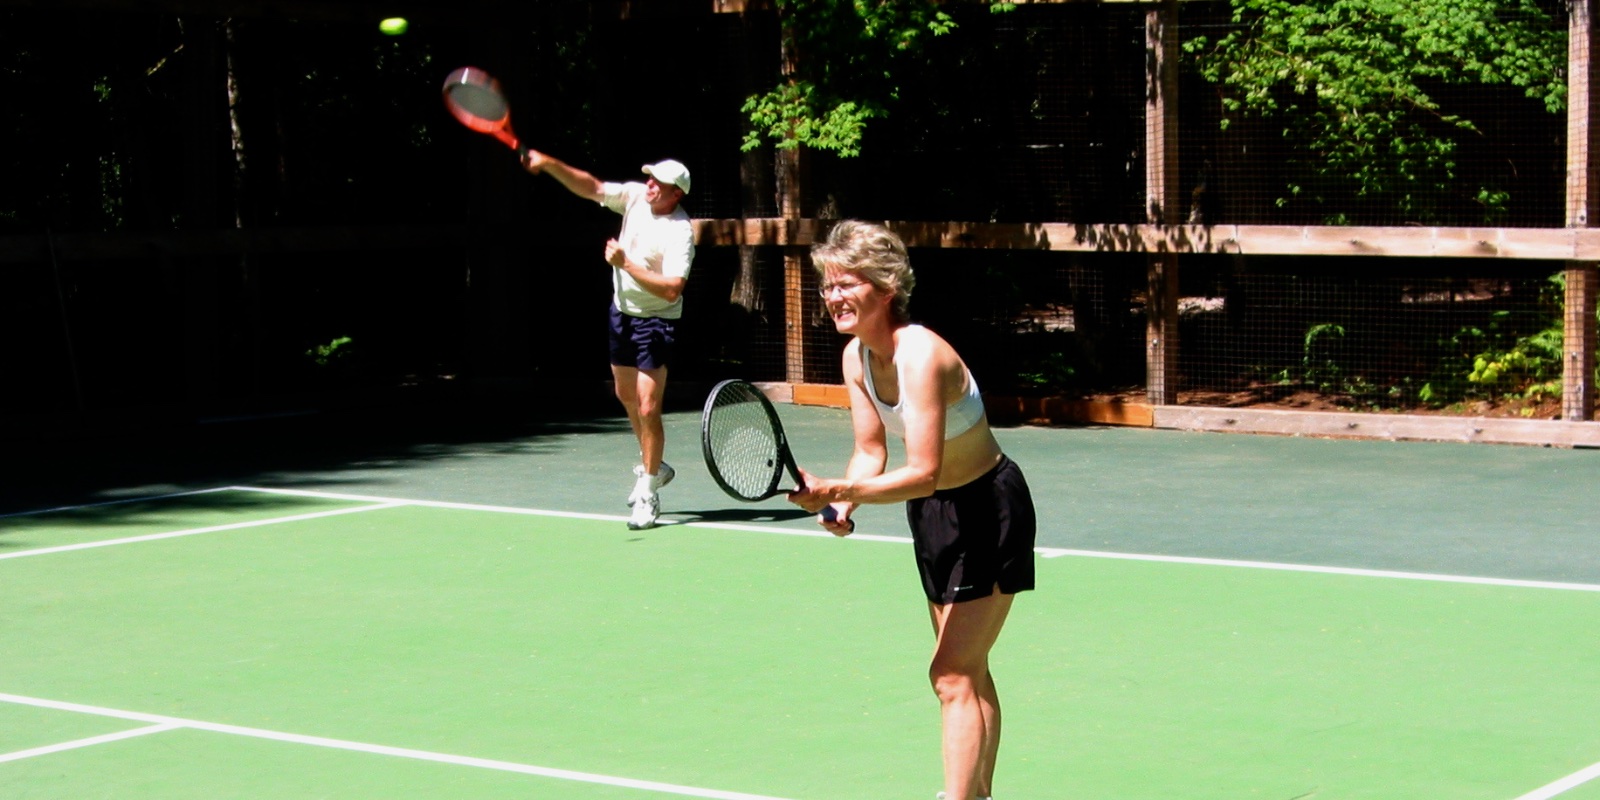 Tennis Courts and Sports Courts are available for all guests